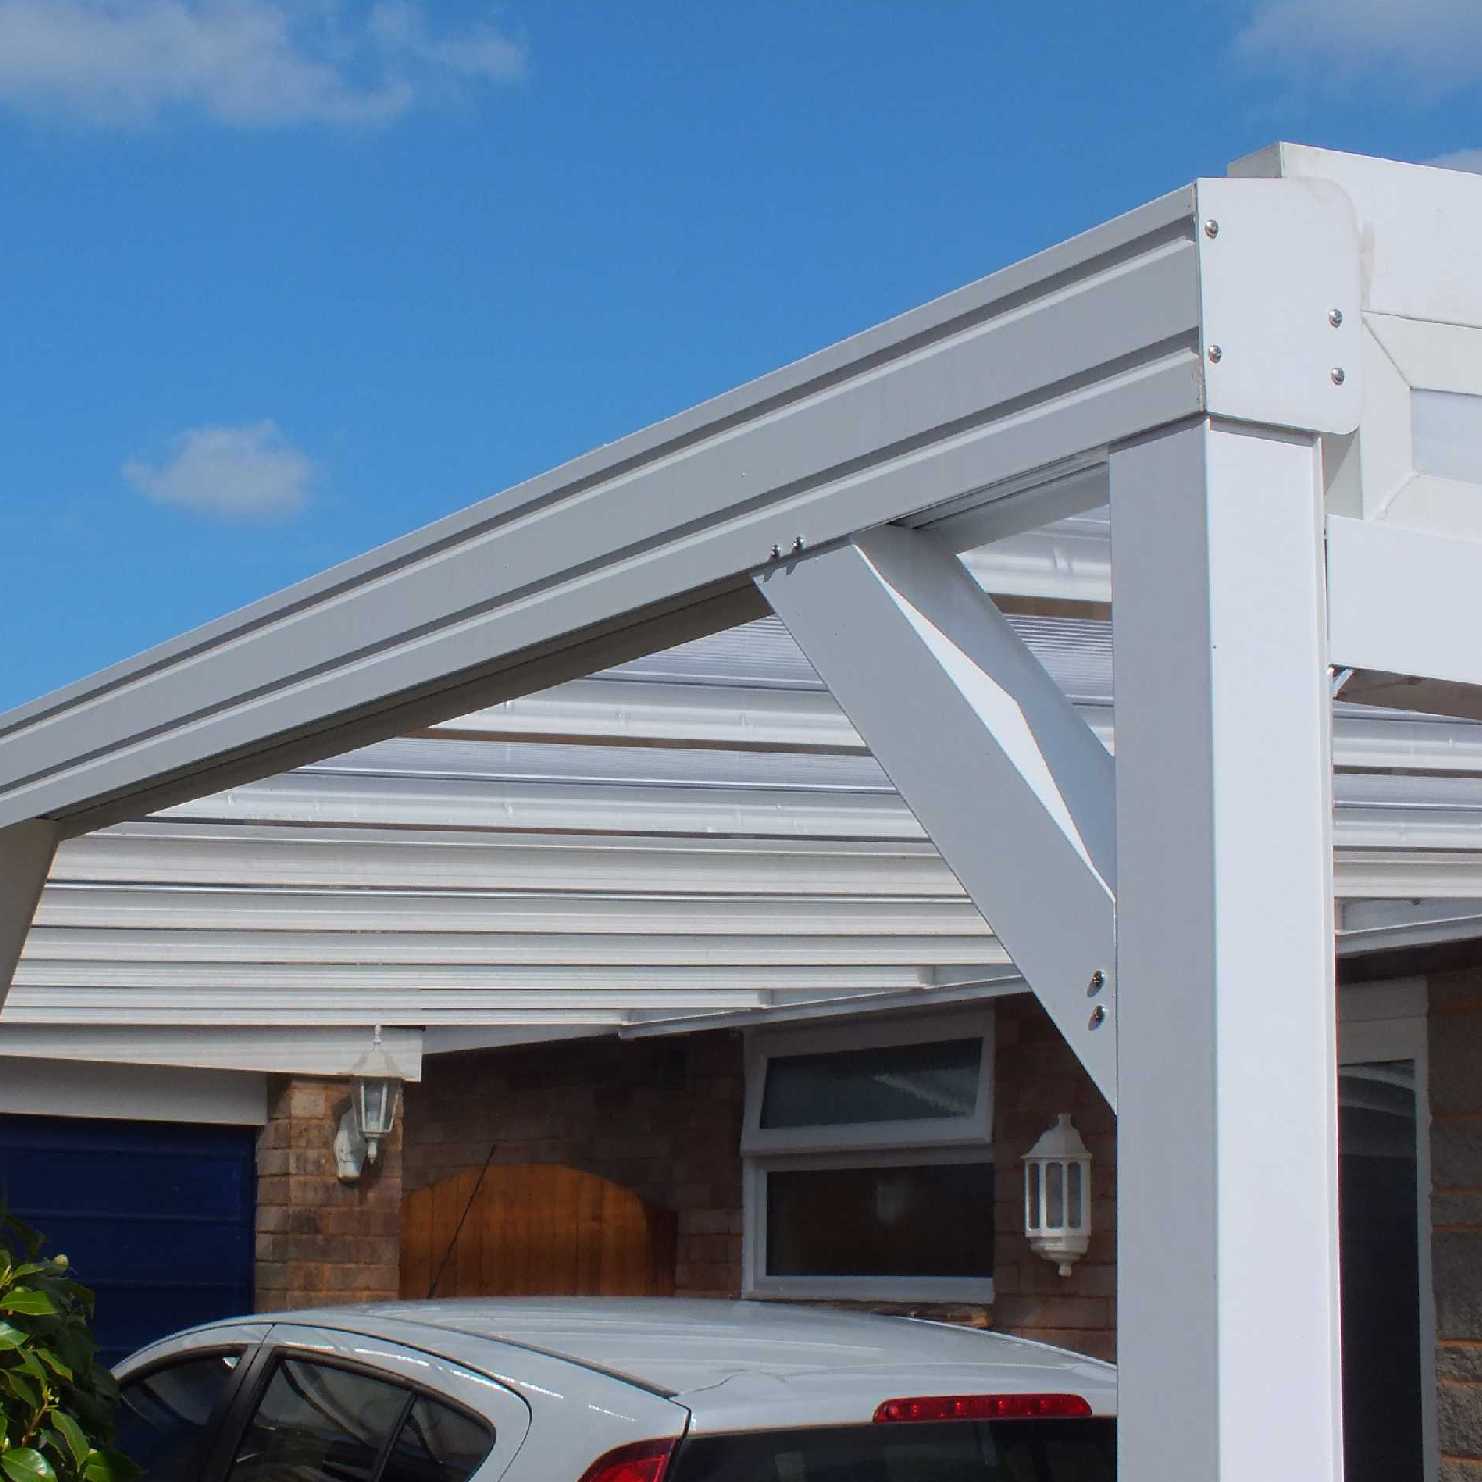 Buy Omega Smart Lean-To Canopy, White with 16mm Polycarbonate Glazing - 4.2m (W) x 4.0m (P), (3) Supporting Posts online today